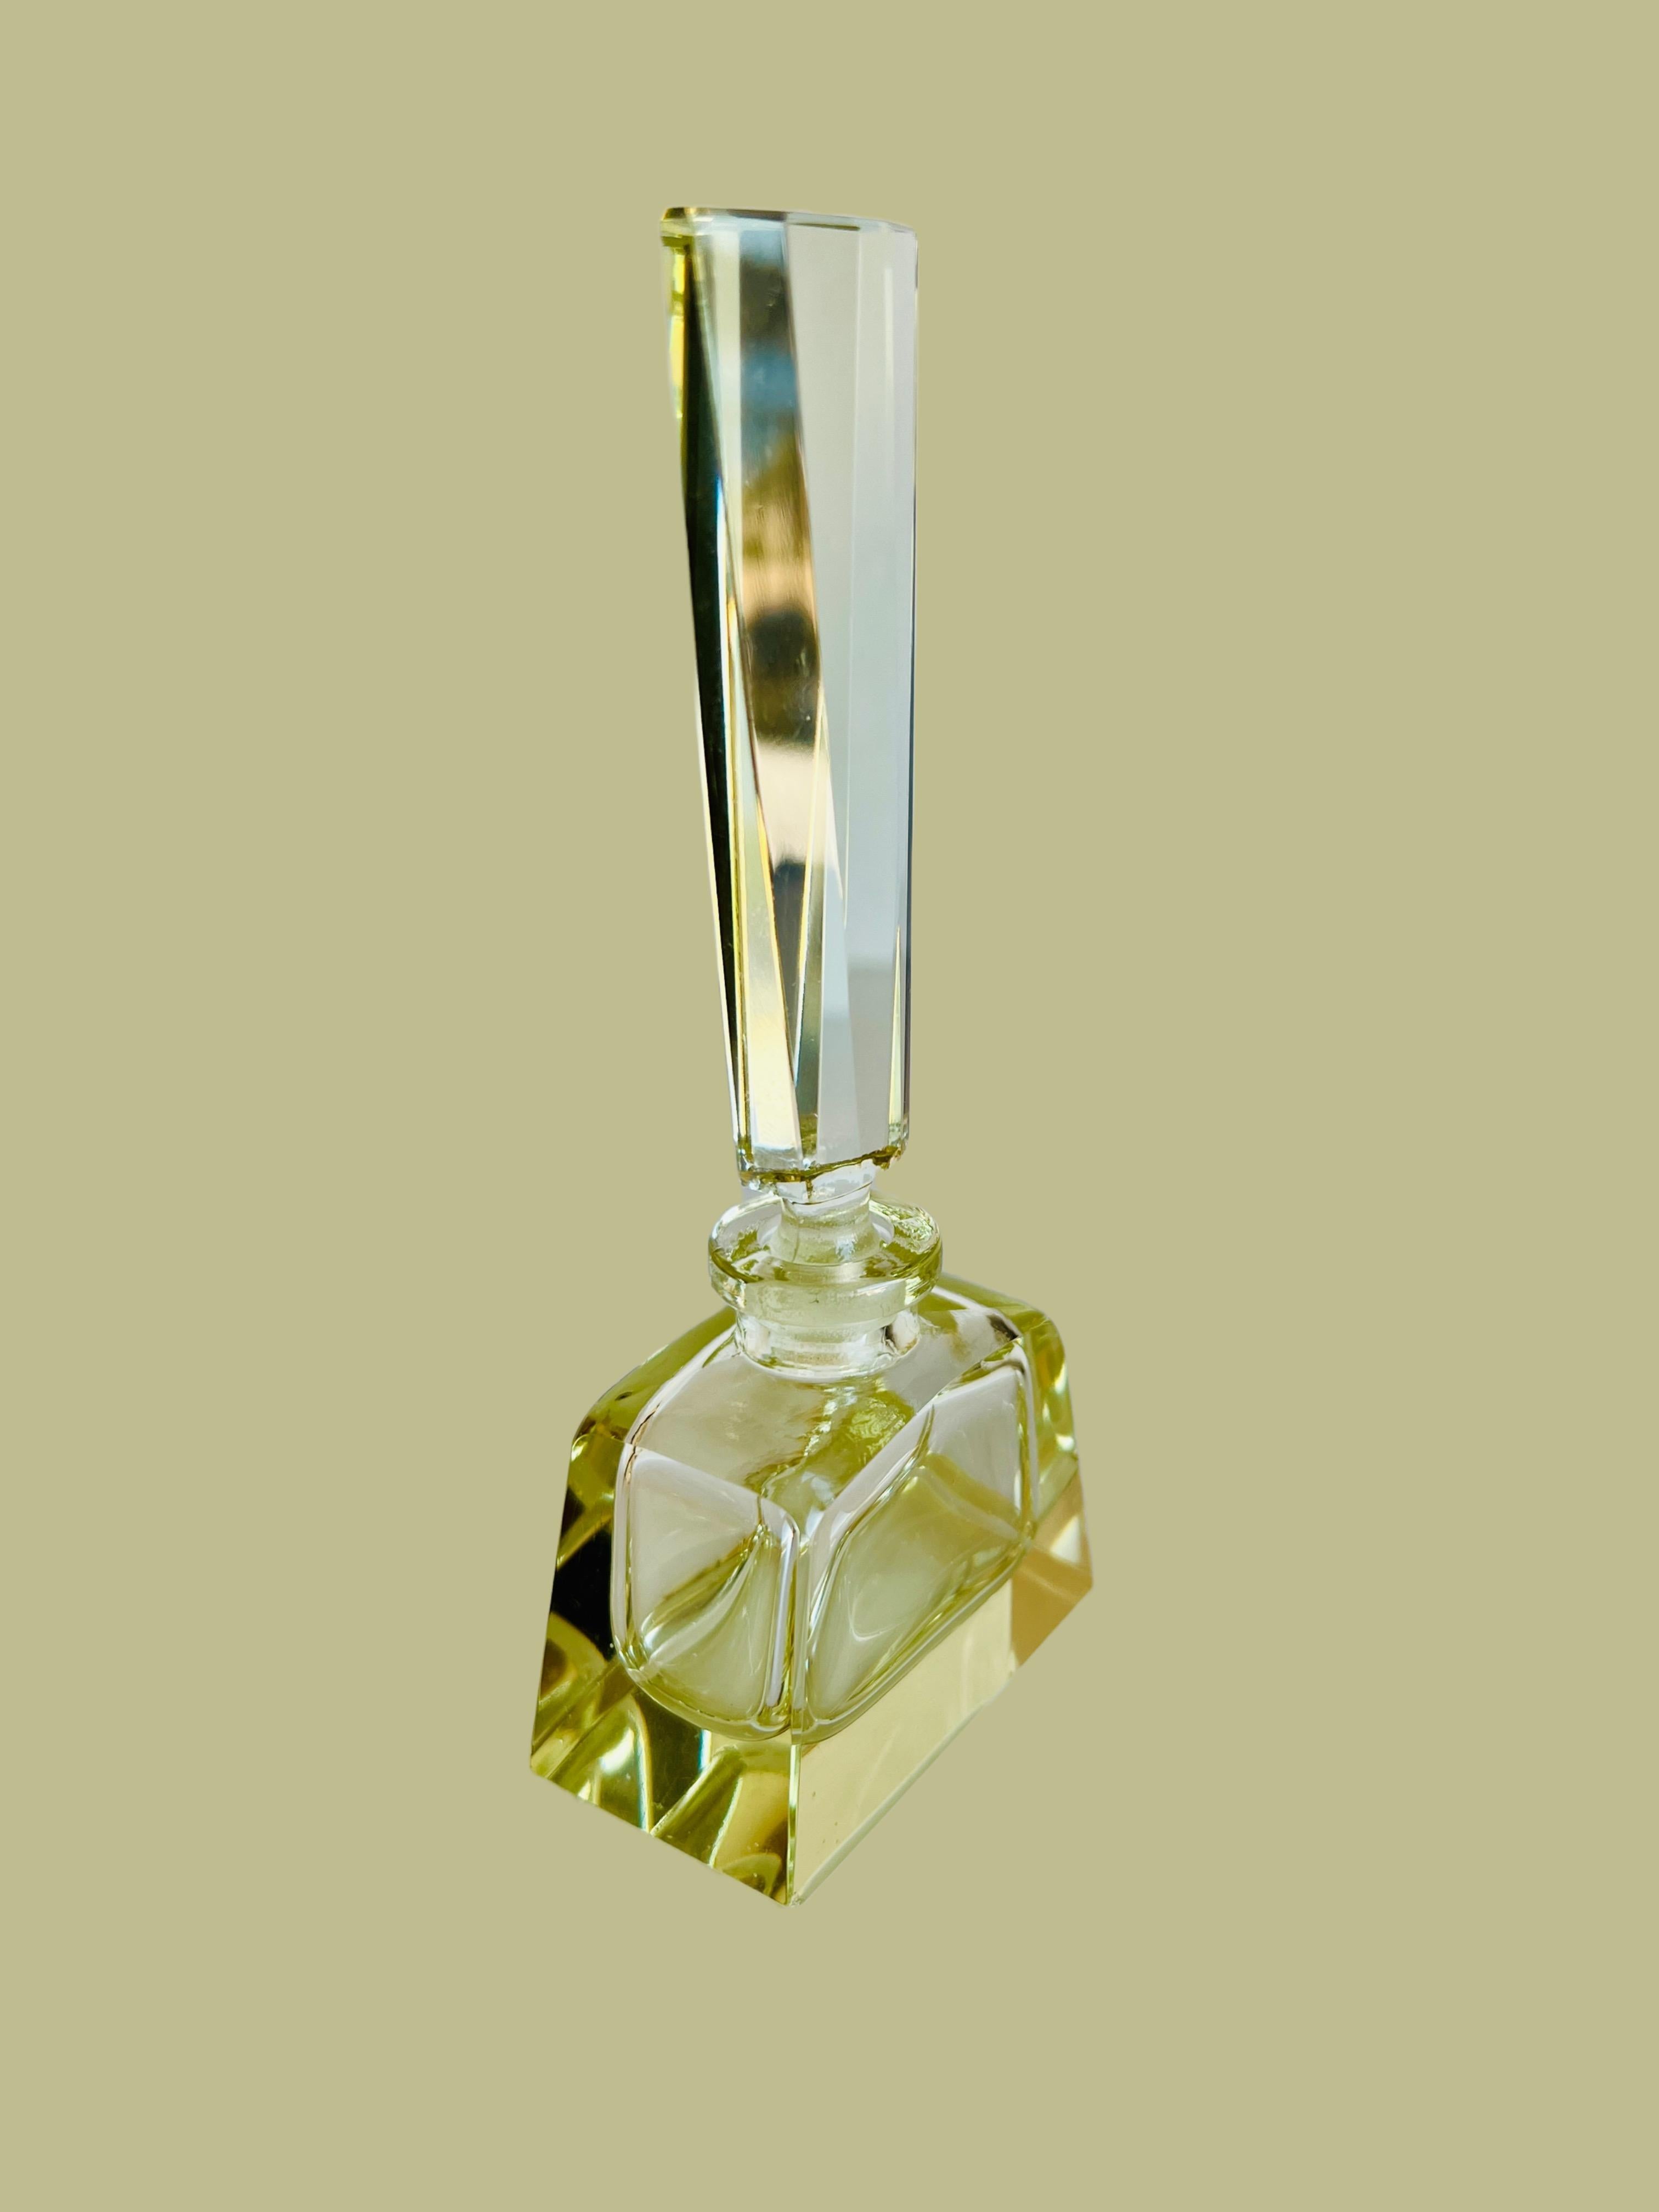 This lovely perfume bottle embodies the grace and sophistication of a bygone era. Crafted from premium crystal with a delicate light yellow hue, the bottle features a bold rectangular body that rests on a solid square base, presenting a harmonious